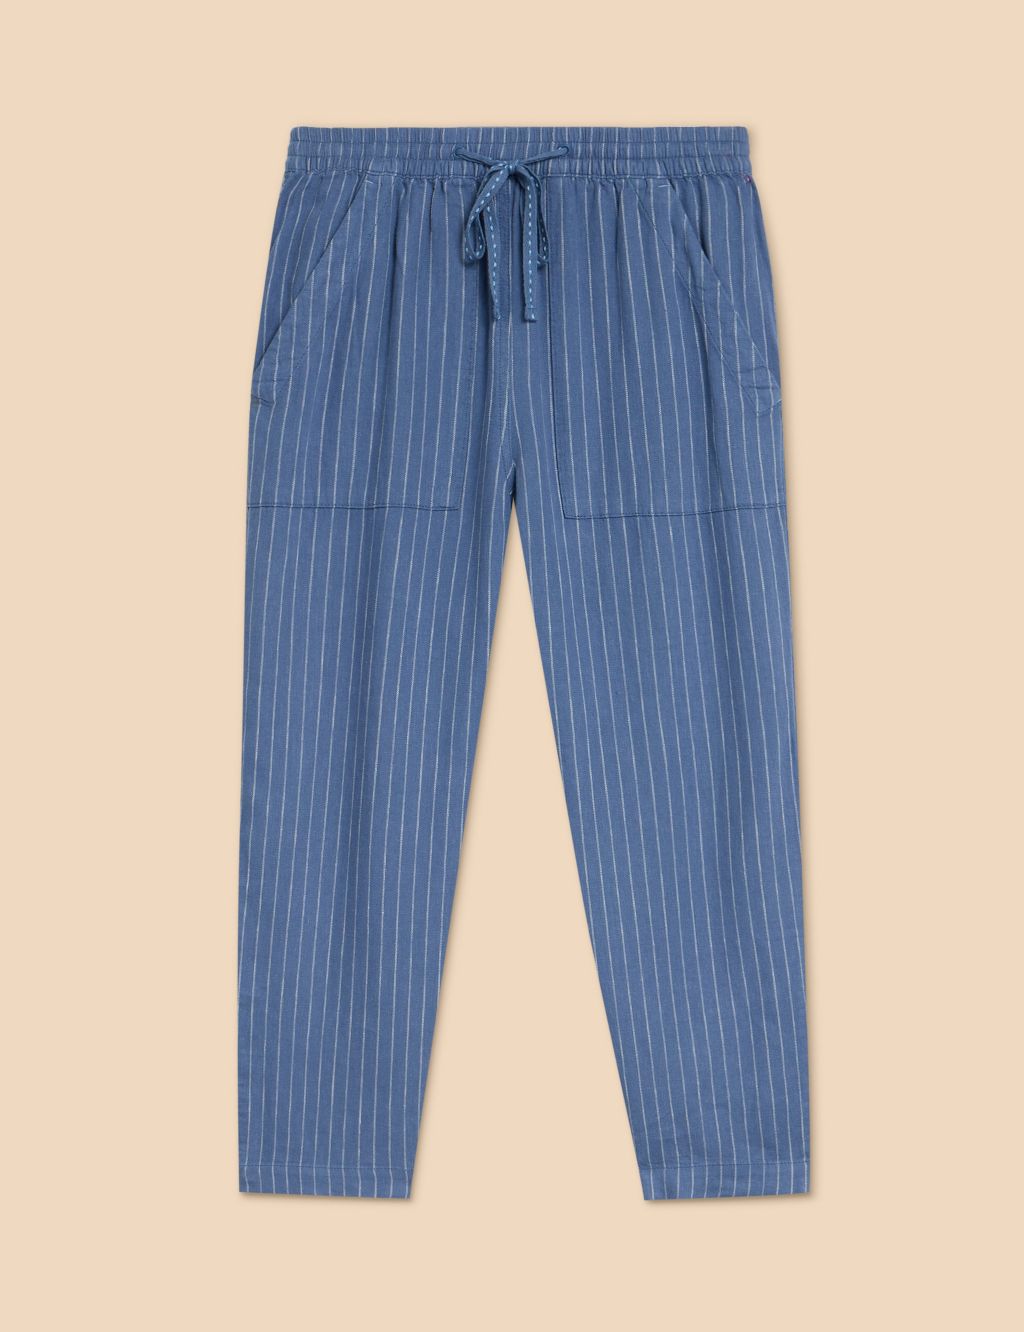 Linen Rich Striped Relaxed Trousers image 2